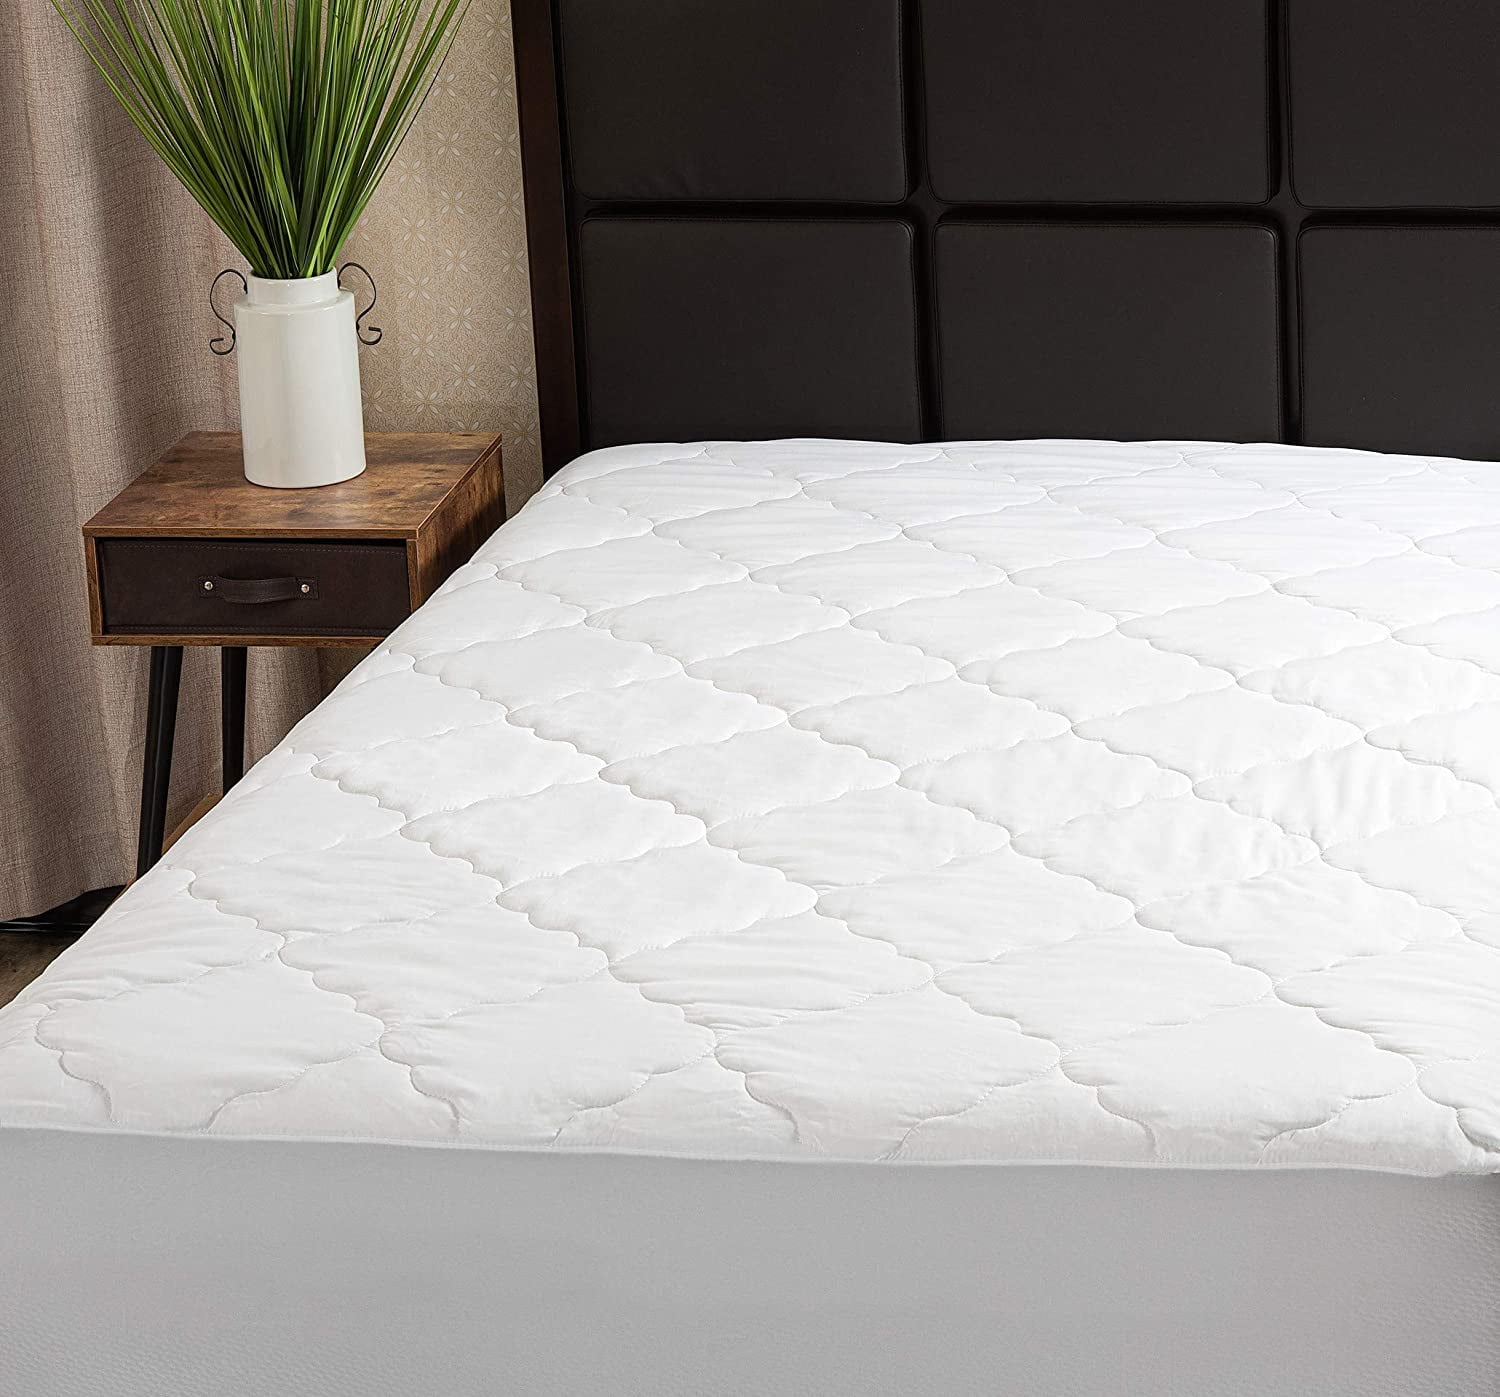 15" Extra Deep Quilted Mattress Cover/Protector 